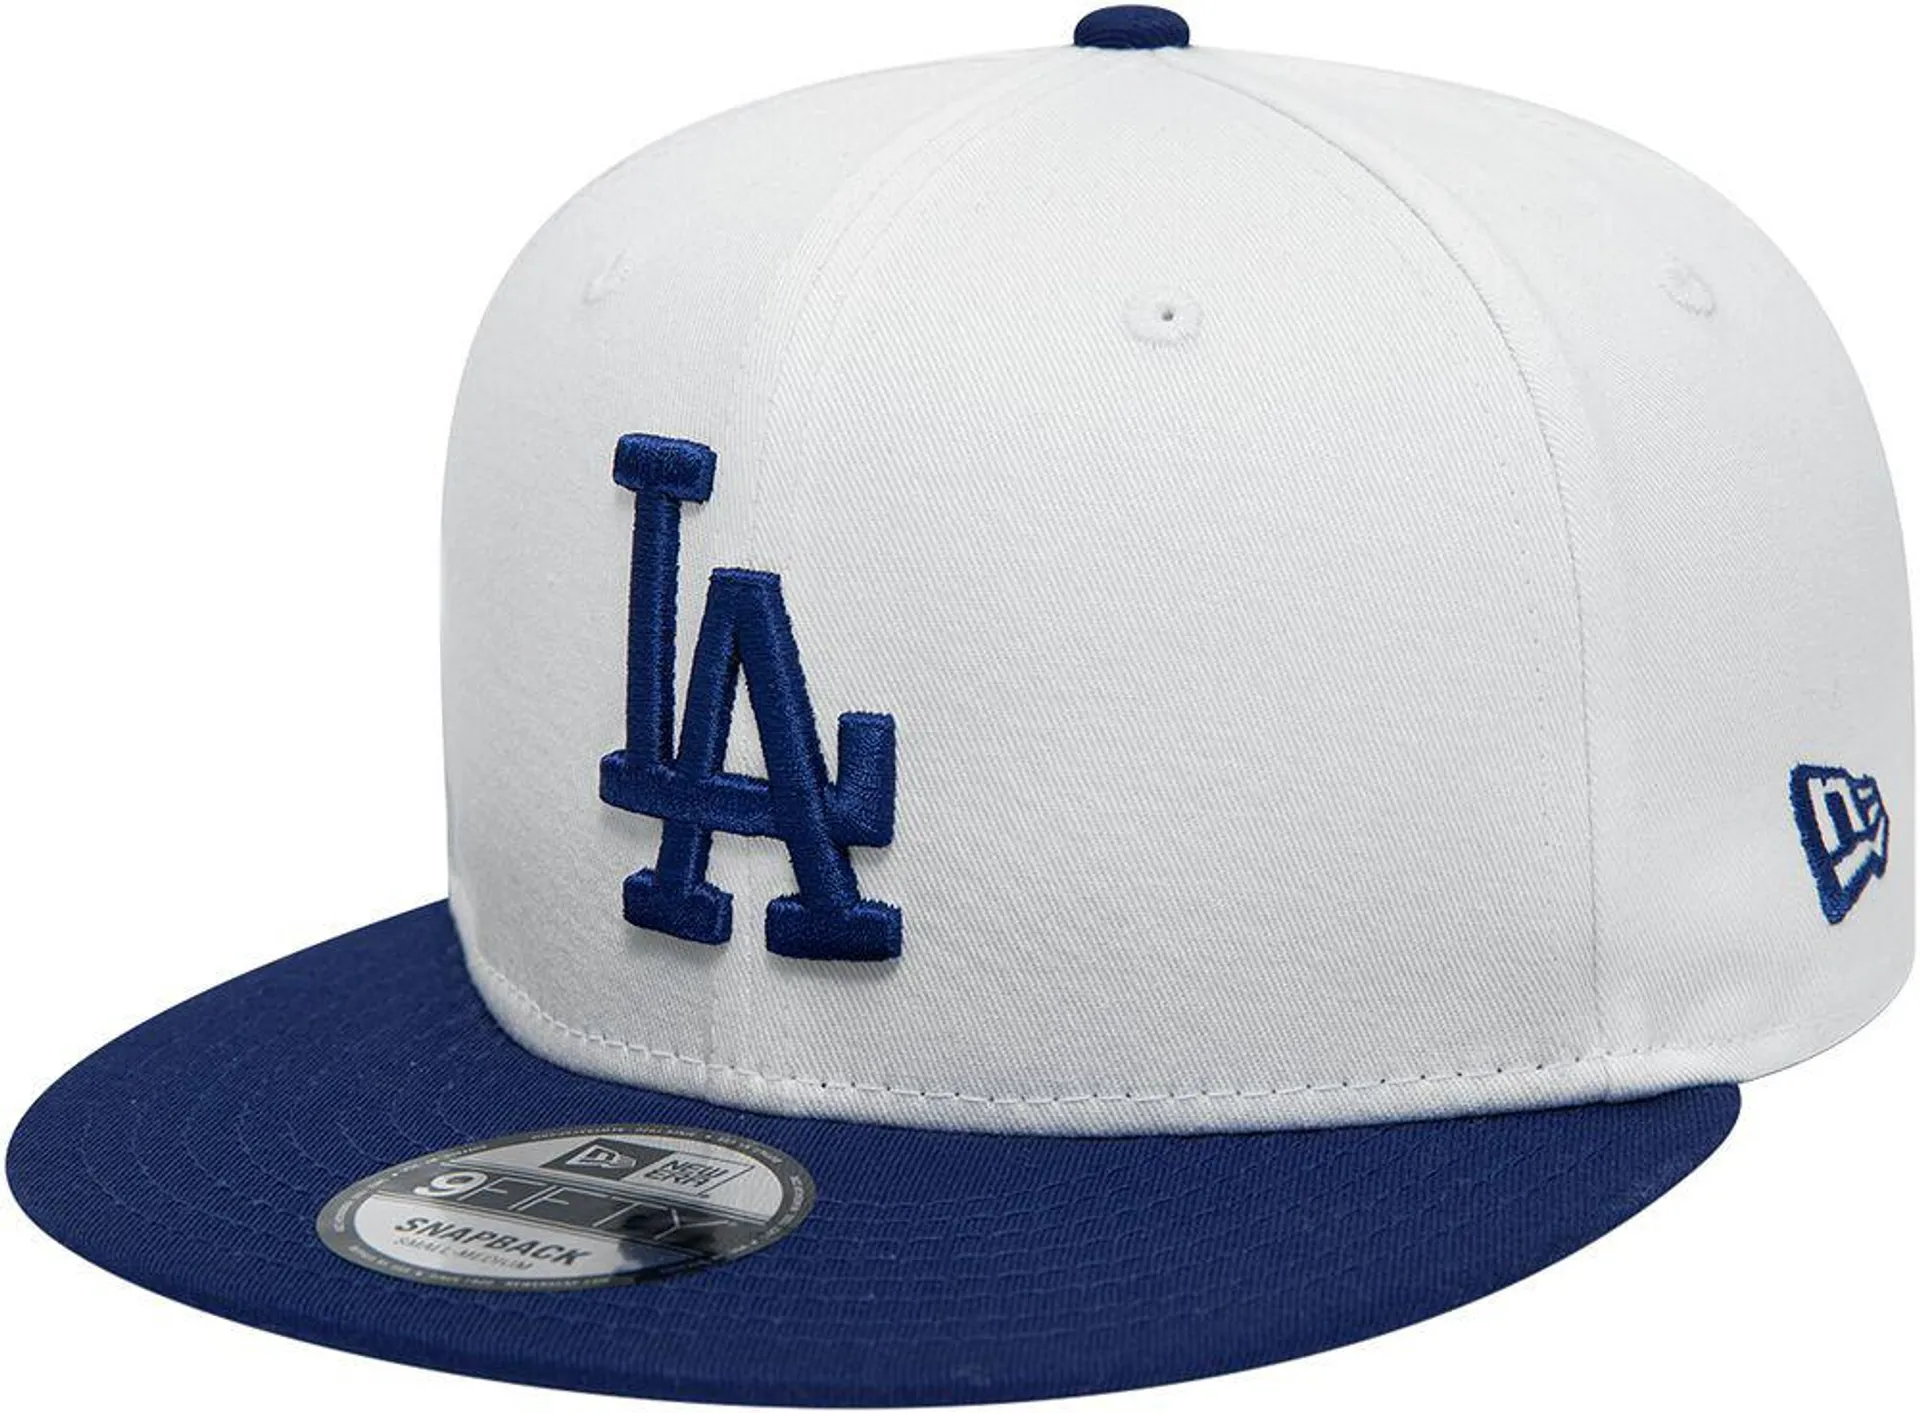 "White Crown Patches 9FIFTY Los Angeles Dodgers" Cap multicolor von New Era - MLB